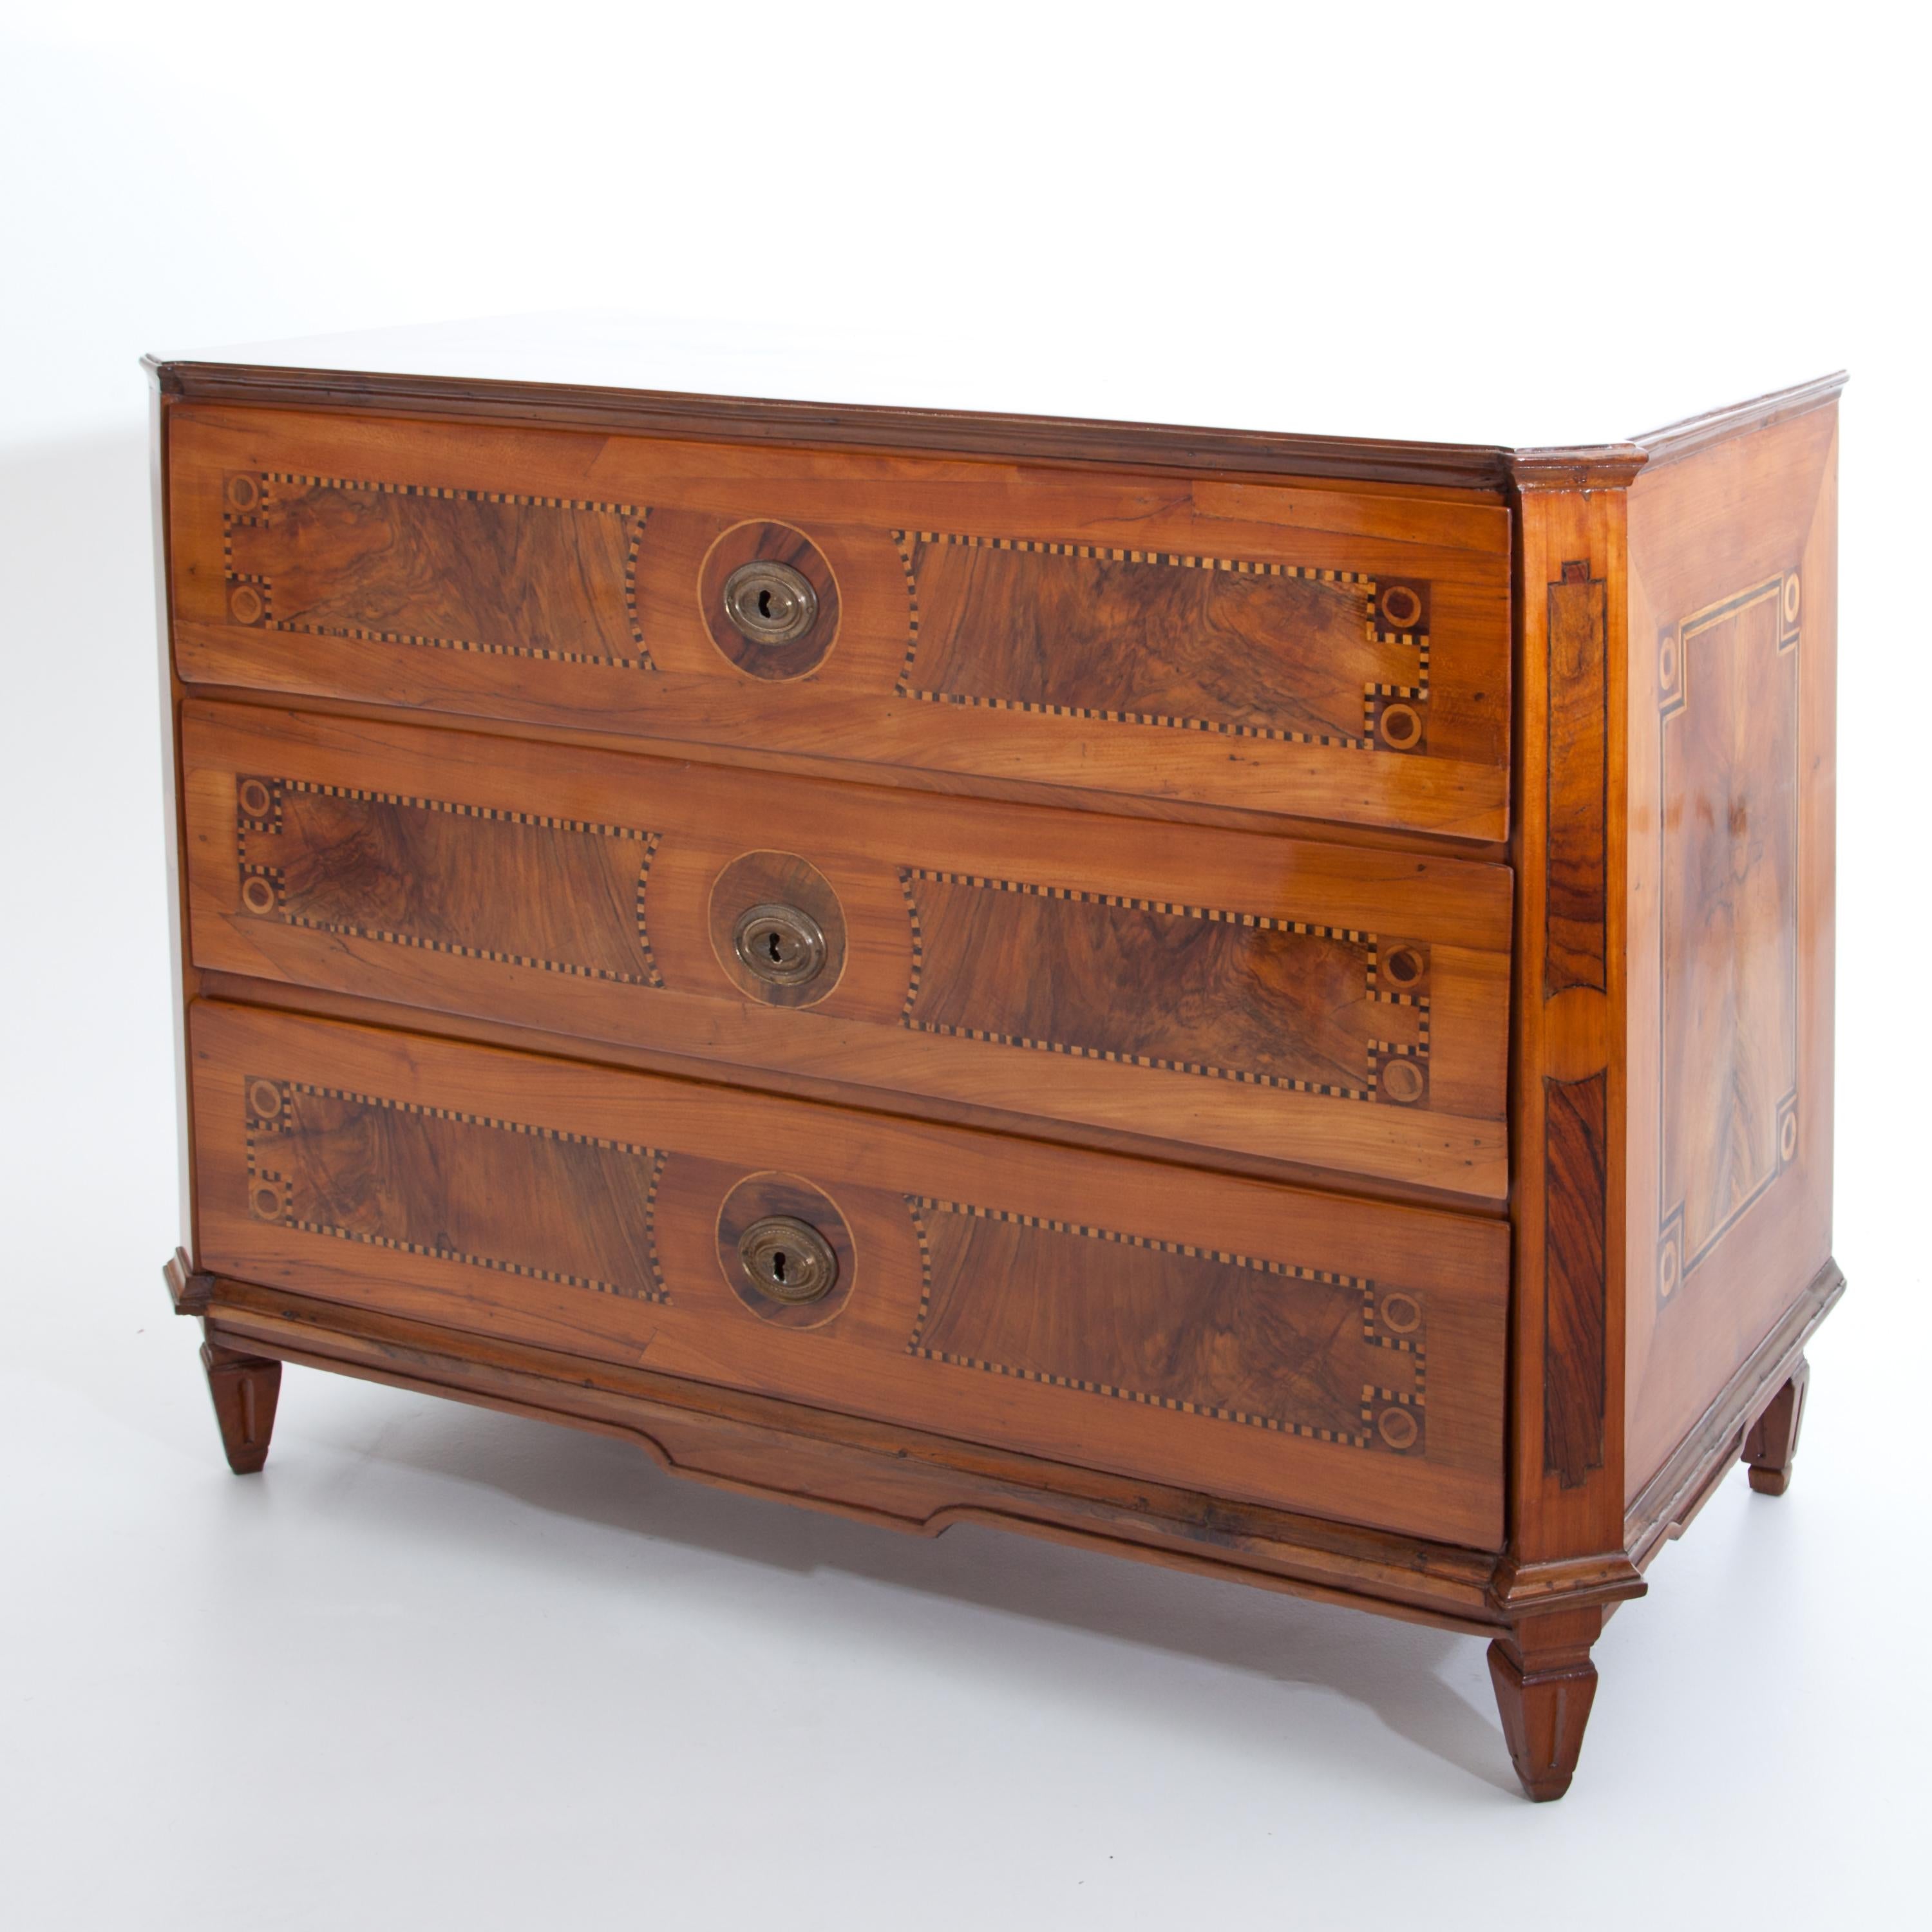 A three-drawered chest of drawers made of cherry on low fluted square pointed feet, with bevelled, slightly cranked corners. The body is inlaid with burl wood in the form of fillings and framed by fillet bands, the top is additionally decorated with